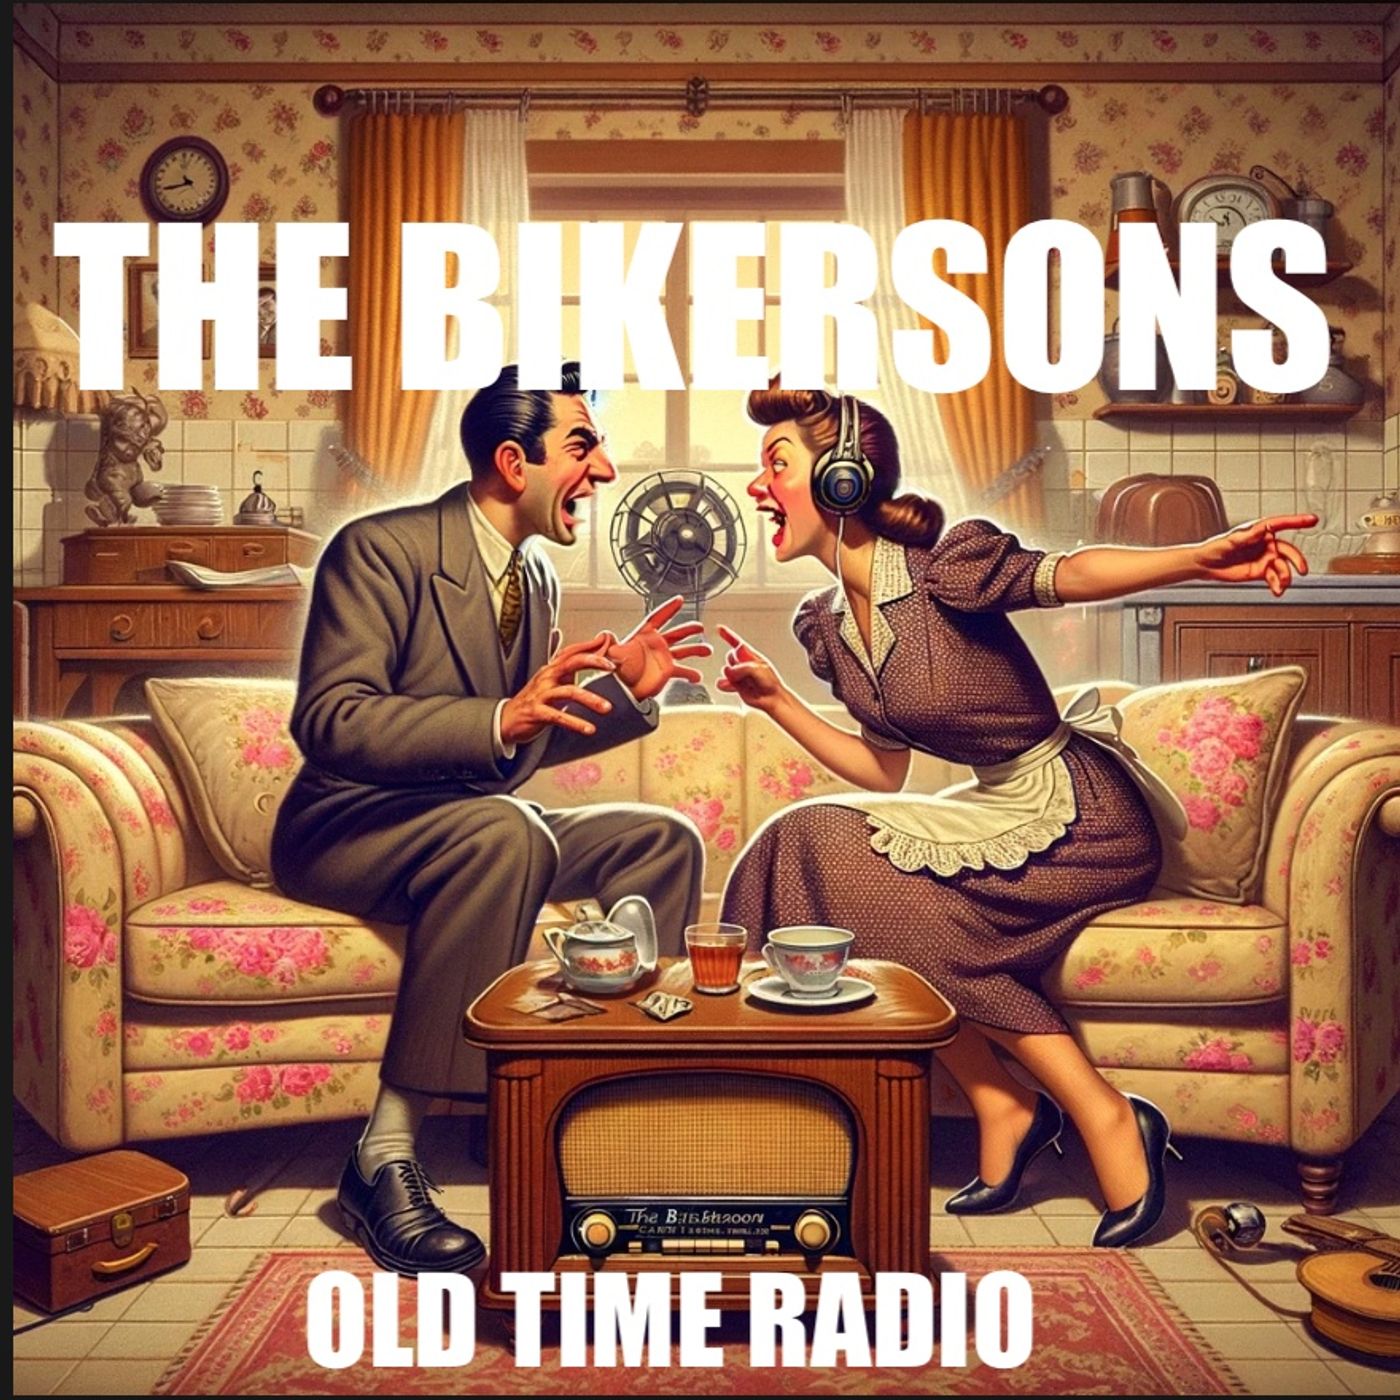 FatalAnniversaryPr an episode of The Bickersons - Old Time Radio